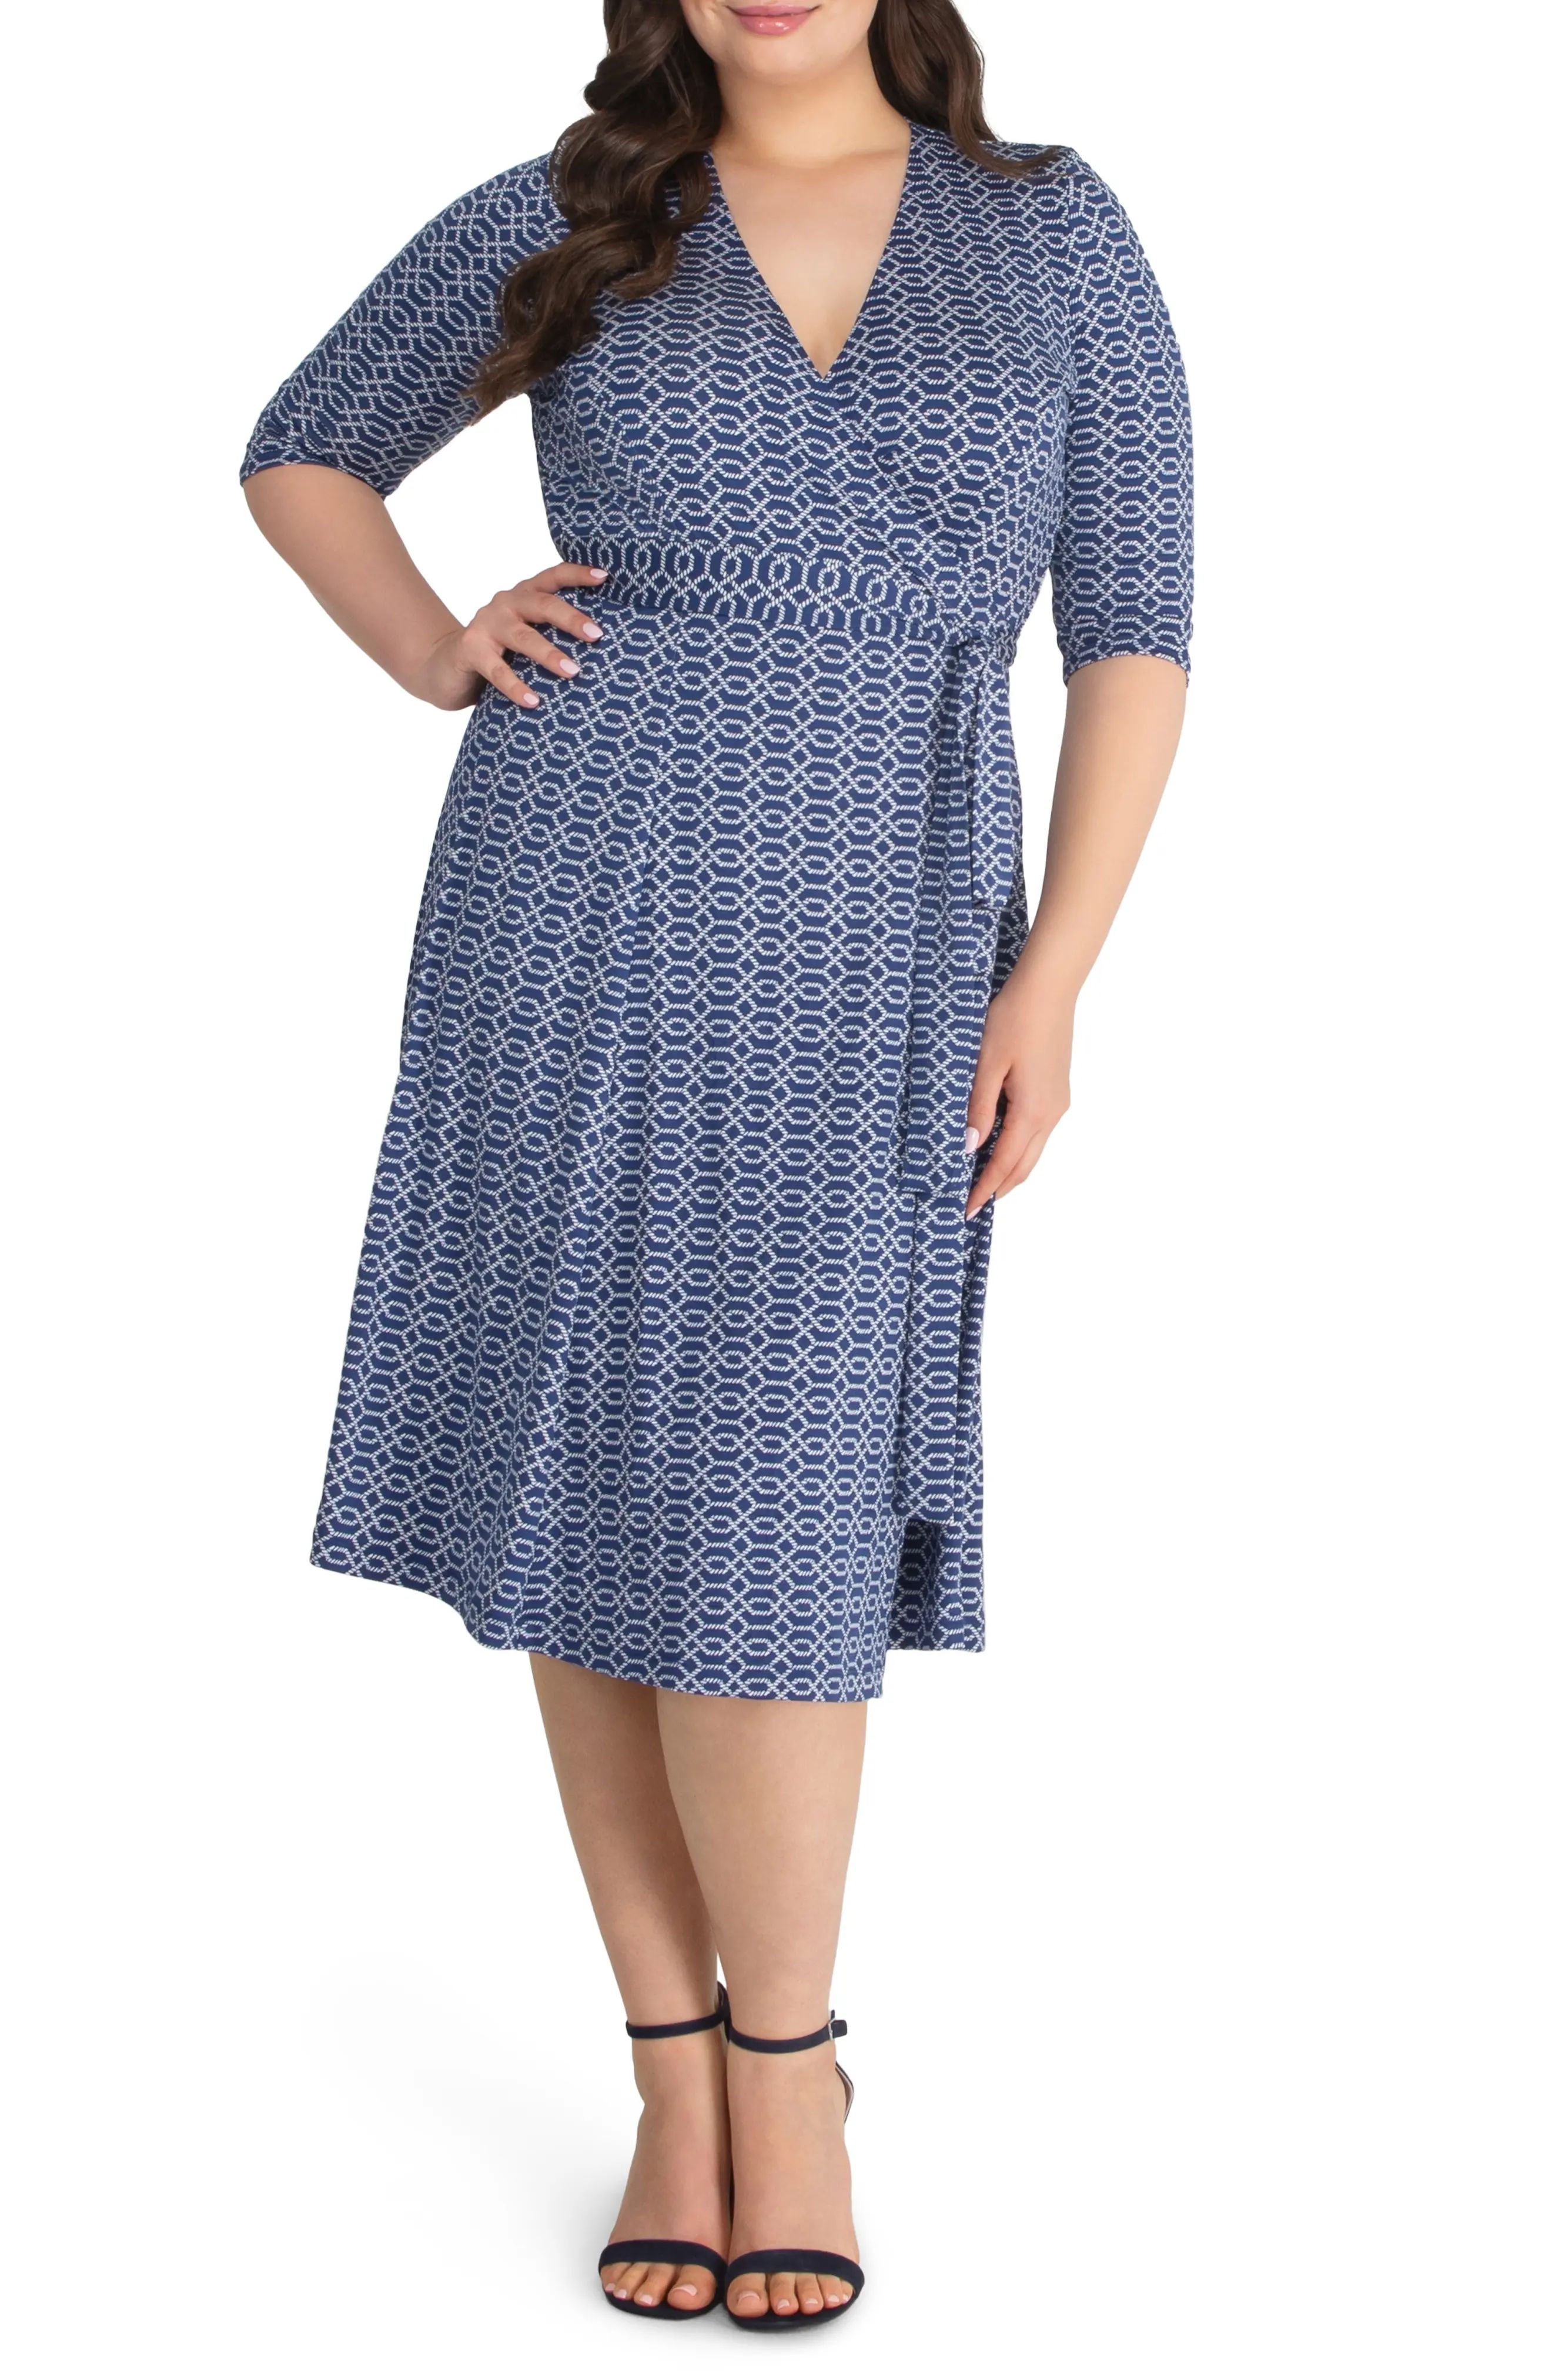 Kiyonna Essential Wrap Dress, Size 2X in Nautical Rope Print at Nordstrom | Nordstrom